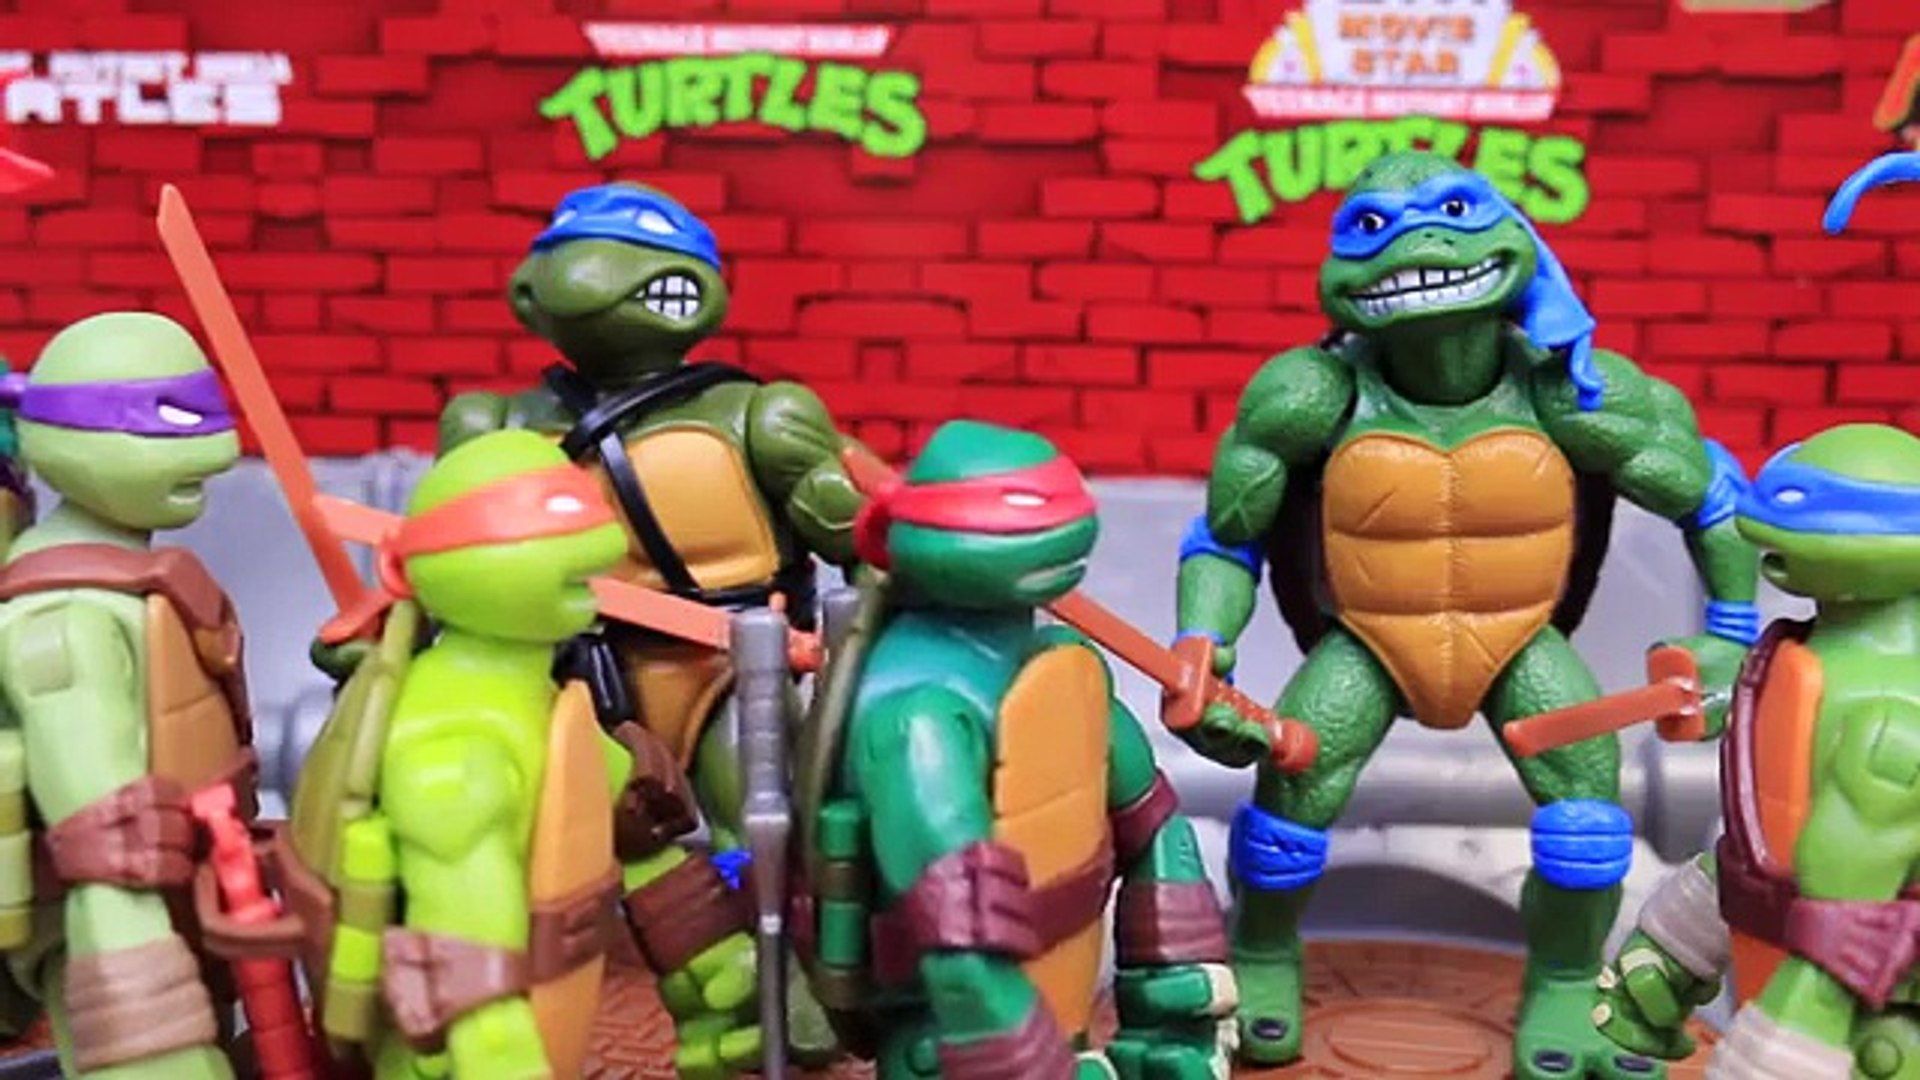 Teenage Mutant Ninja Turtles History Lesson with TMNT Classic and Fast Forward with Live Action Toys